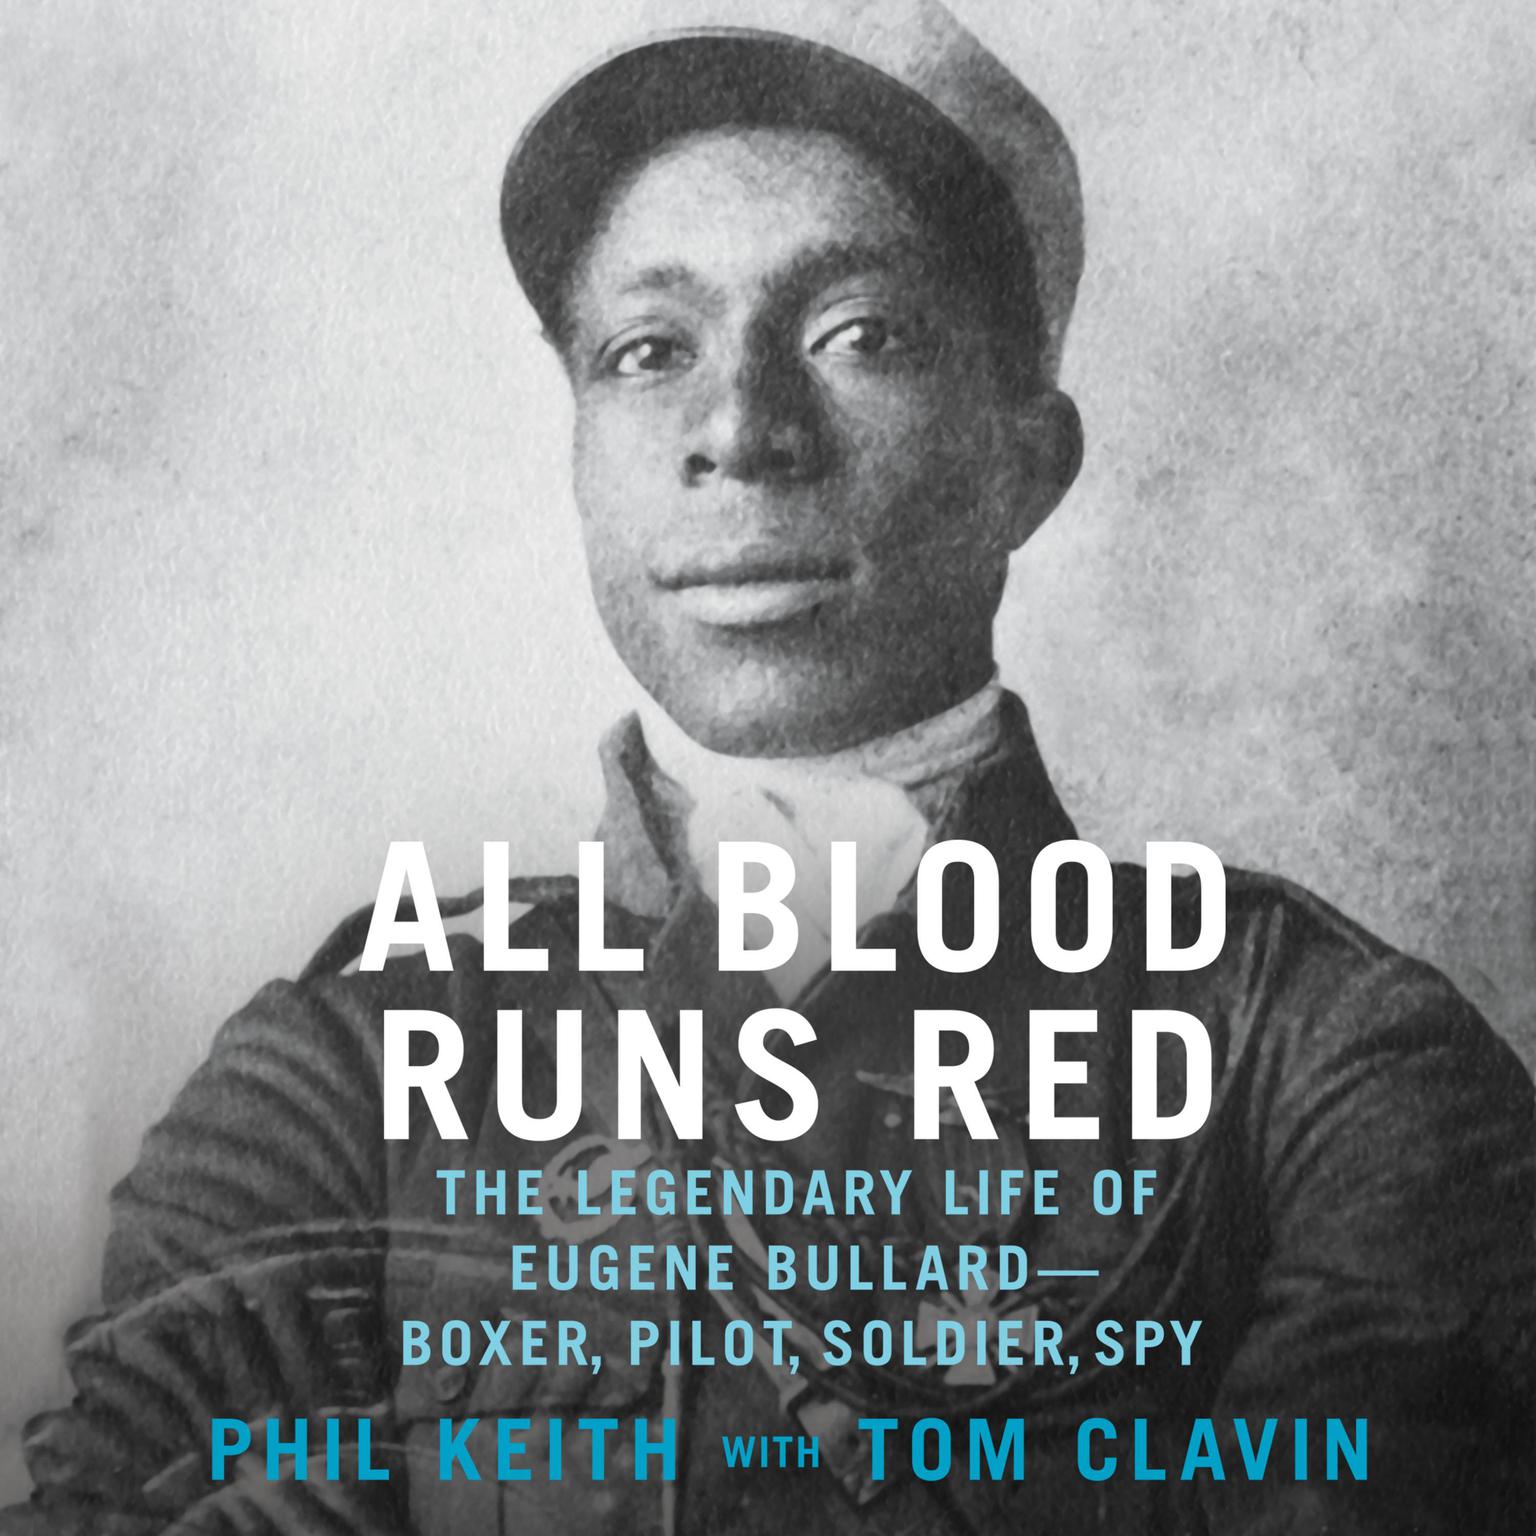 All Blood Runs Red: The Legendary Life of Eugene Bullard—Boxer, Pilot, Soldier, Spy Audiobook, by Phil Keith